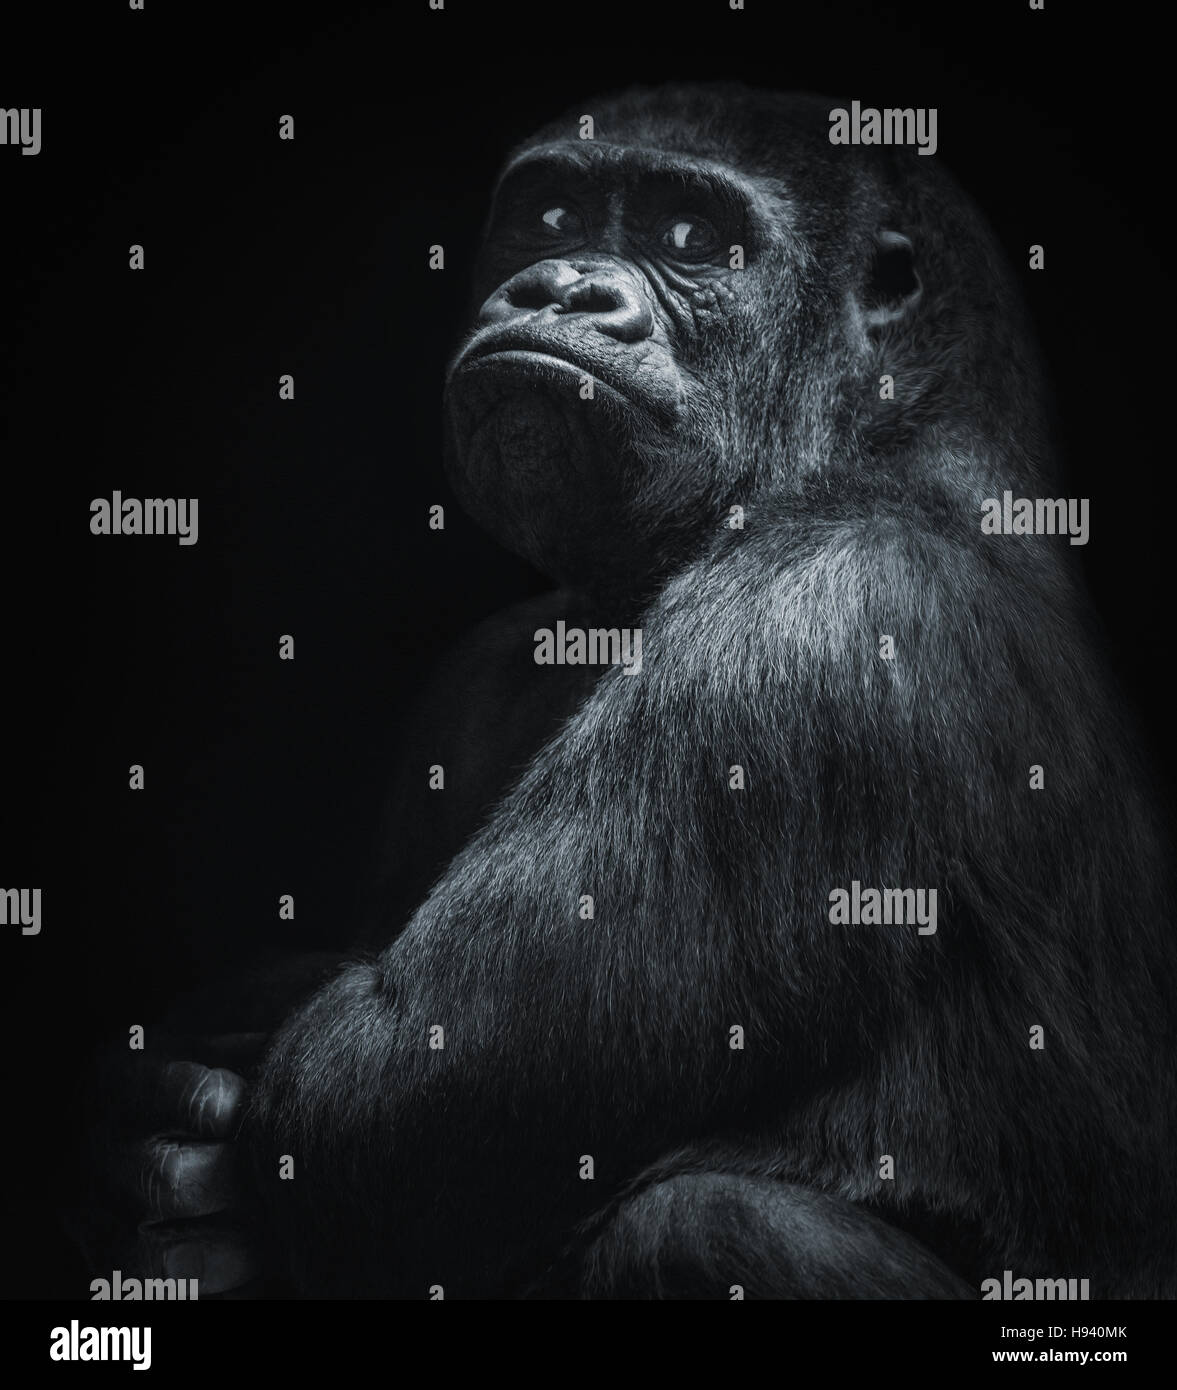 A big and nosy gorilla in black and white Stock Photo